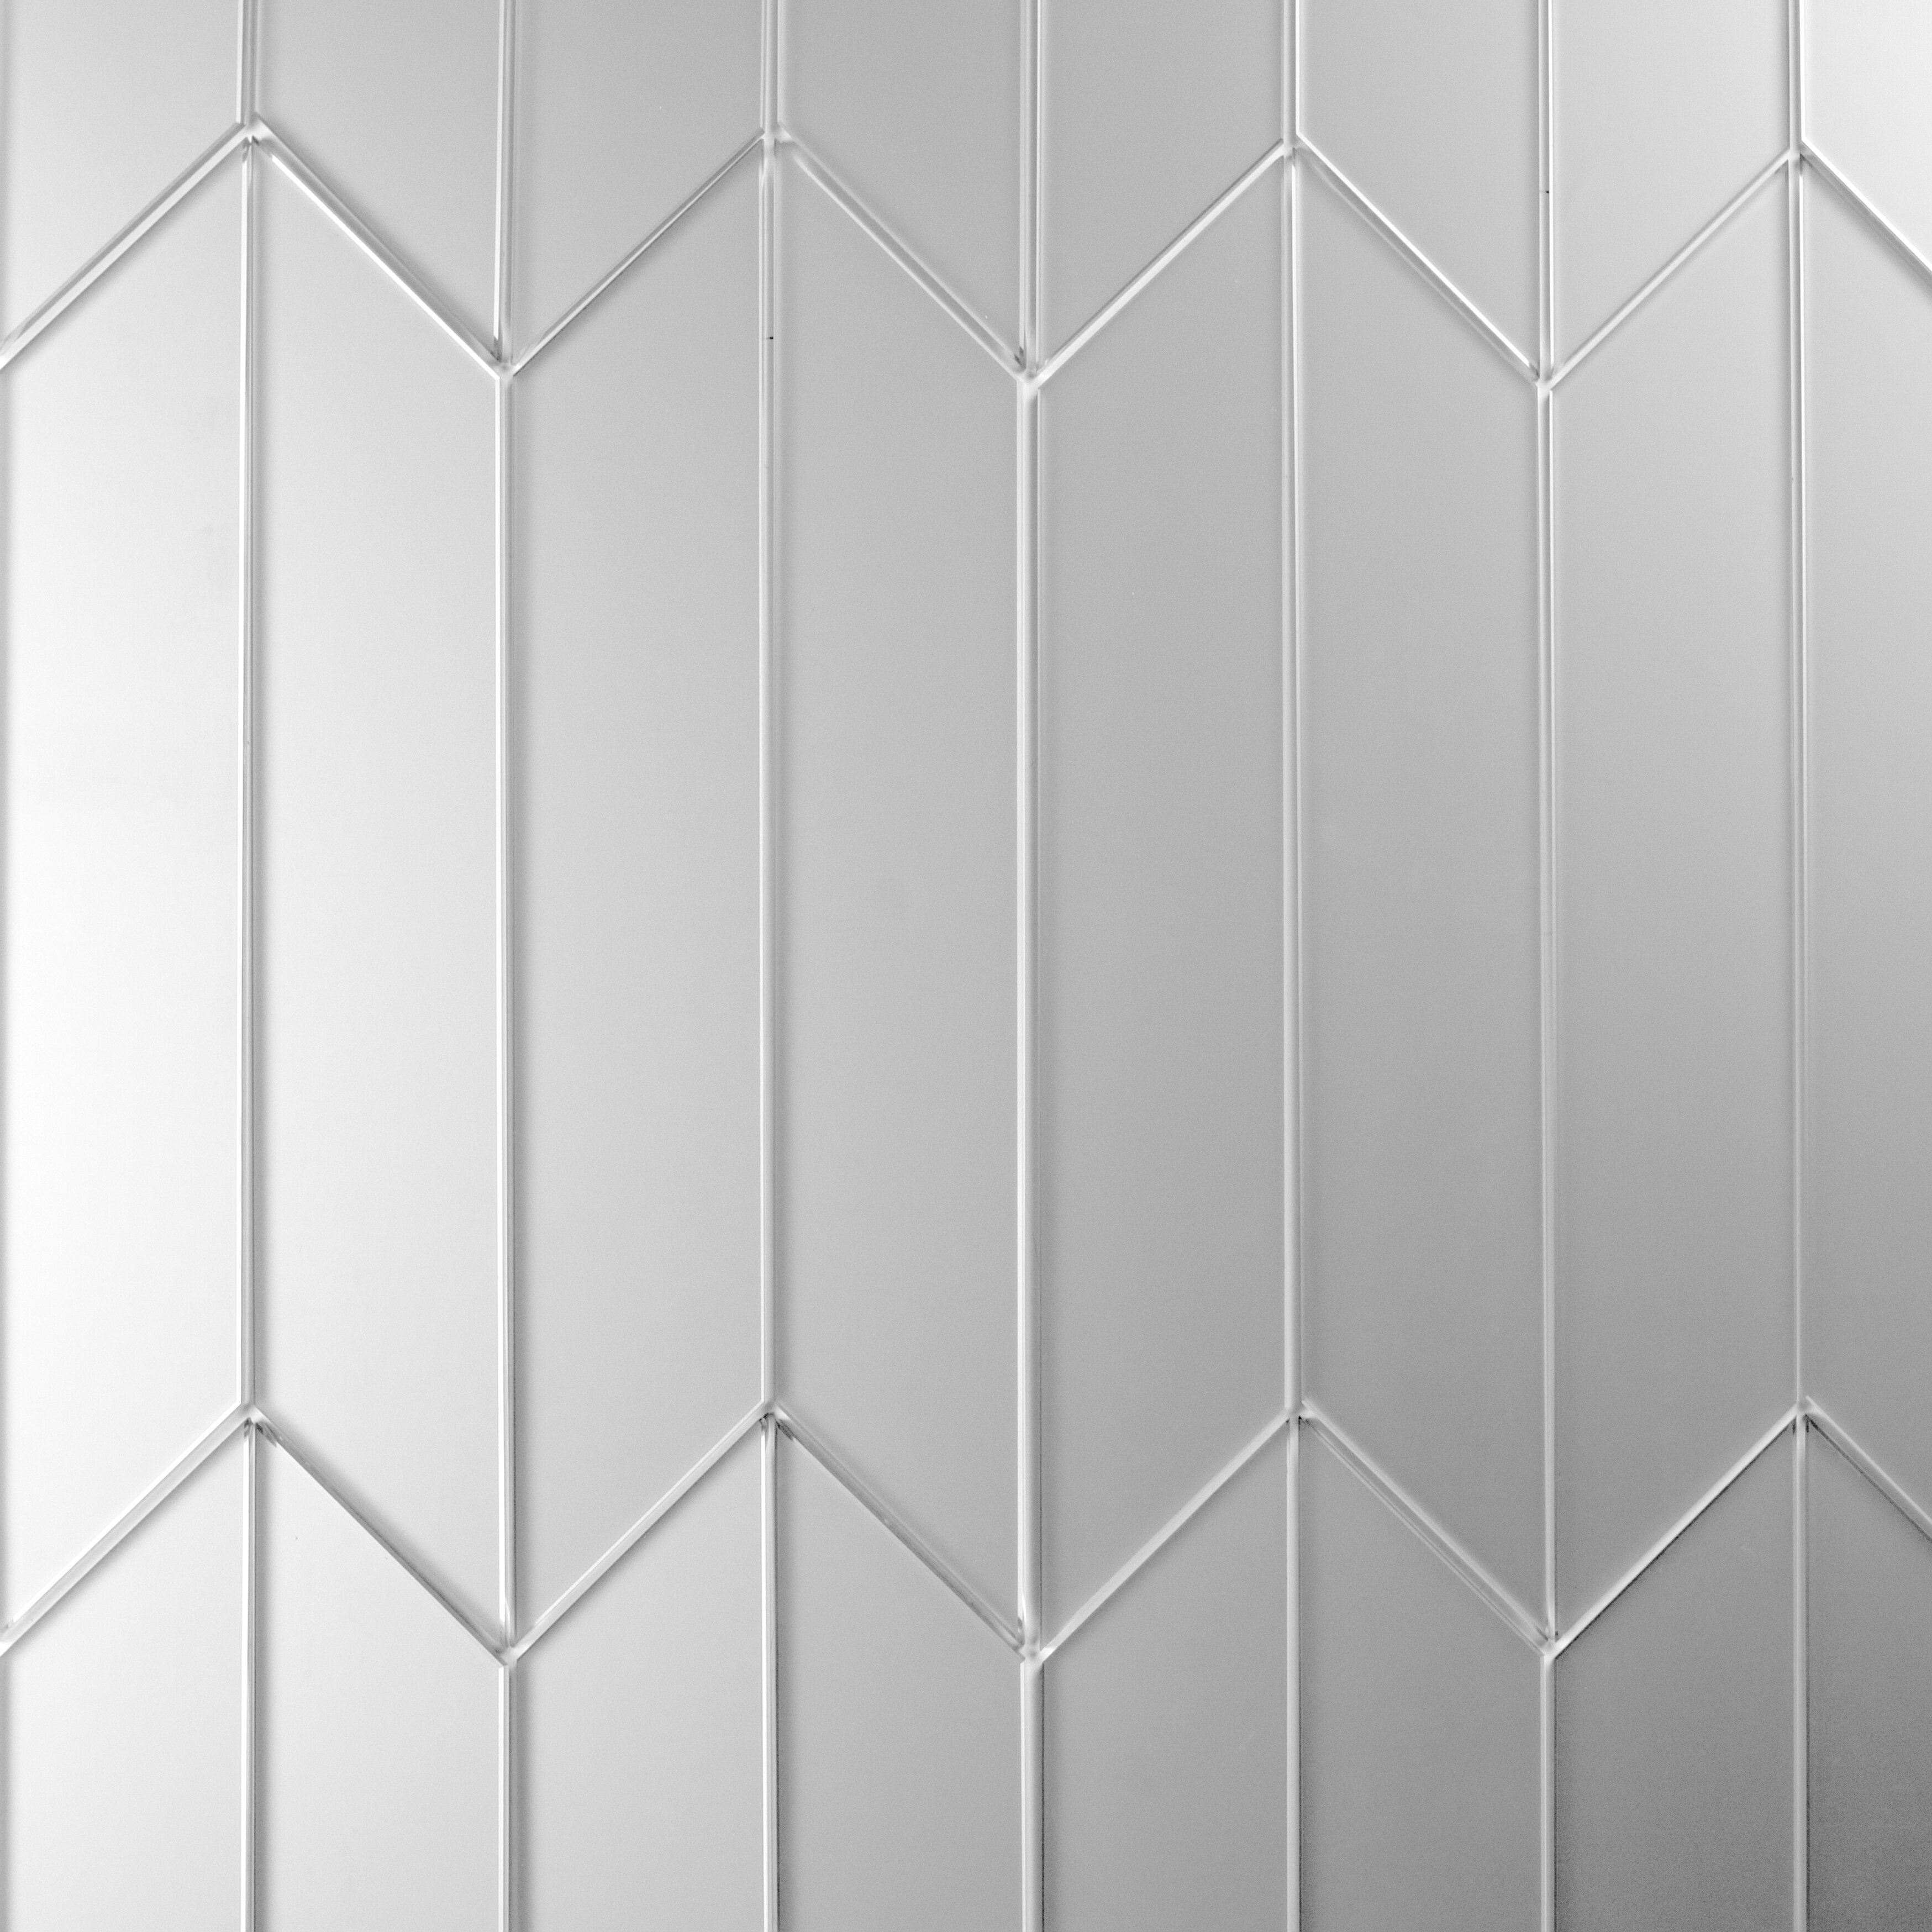 Abolos Frosted Reflections 3 in. x 6 in. Matte Glass Mirror Beveled Subway  Decorative Kitchen & Bathroom Wall Tile & Reviews